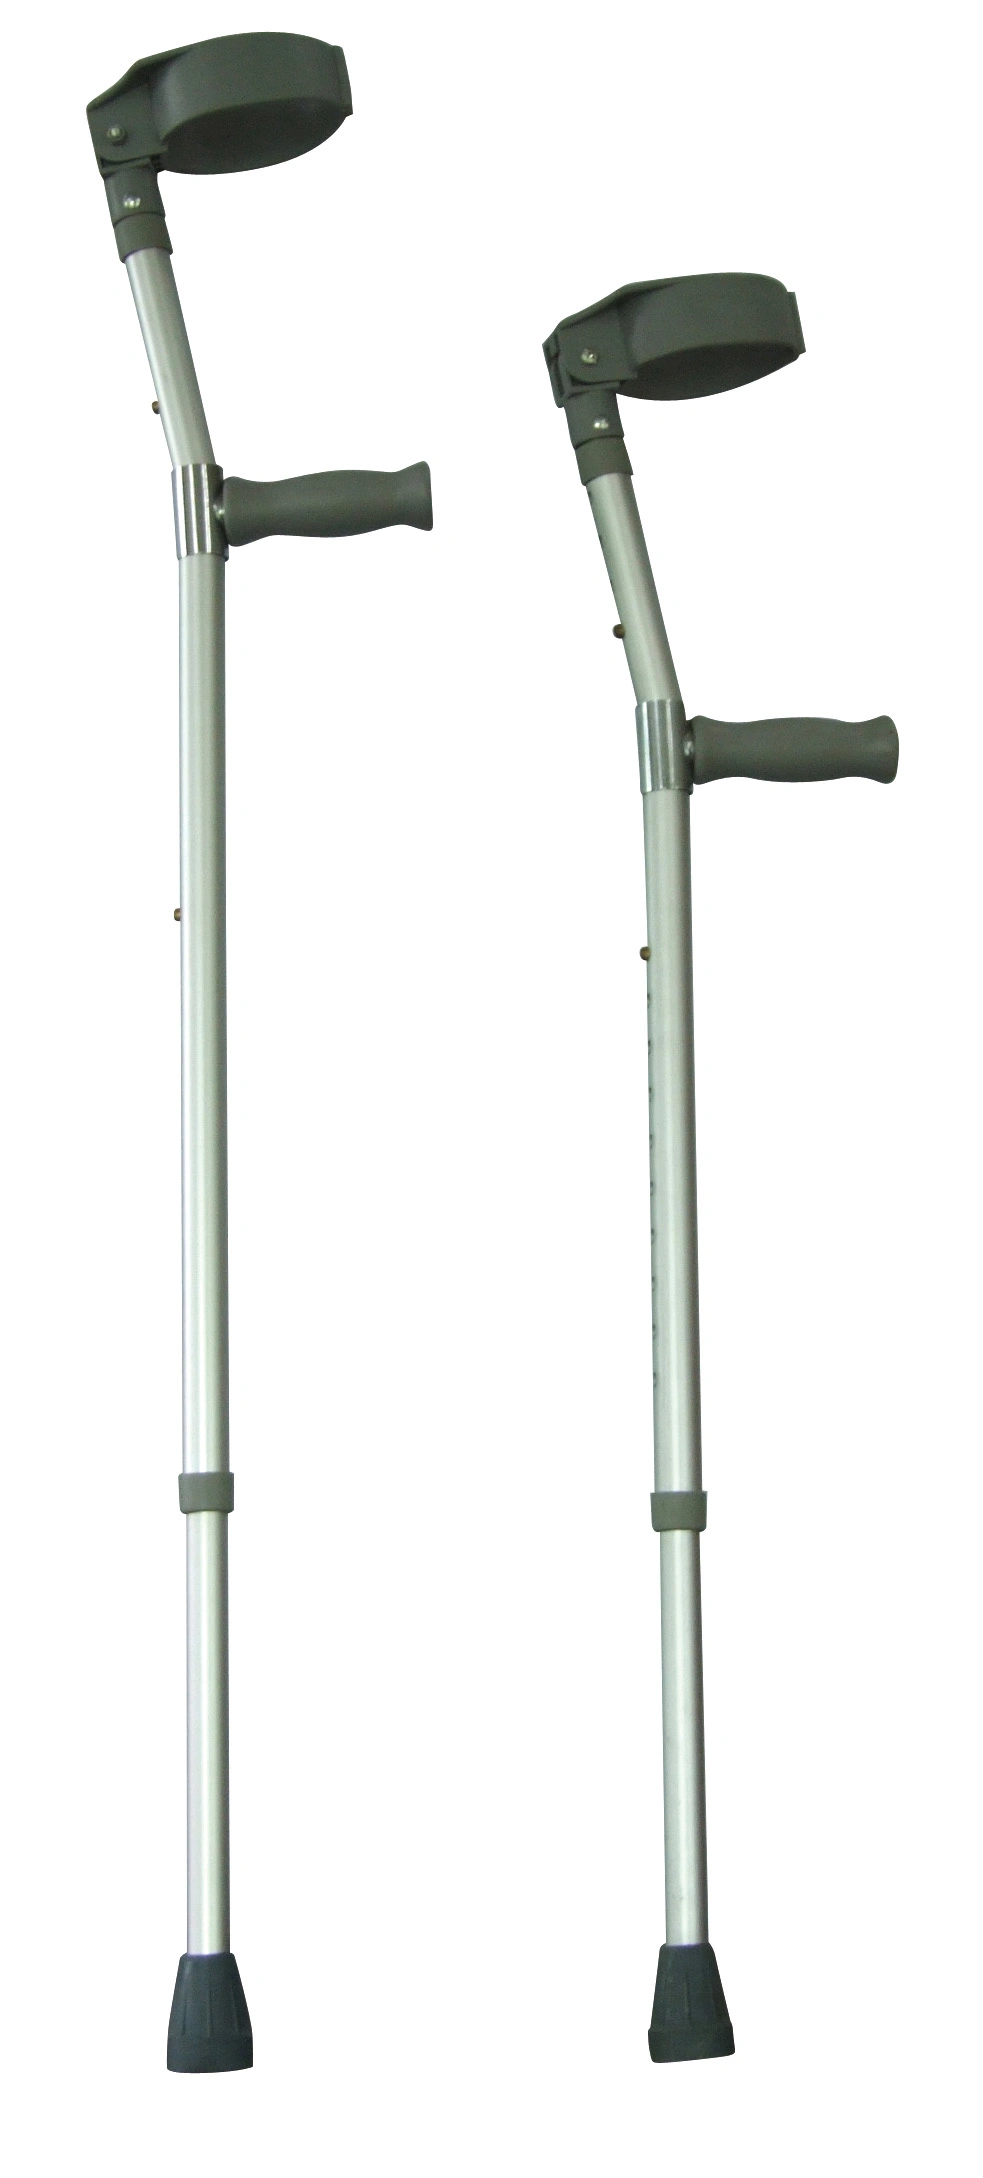 Promotion Europe Style Forearm Elbow Crutches and Walking Stick.